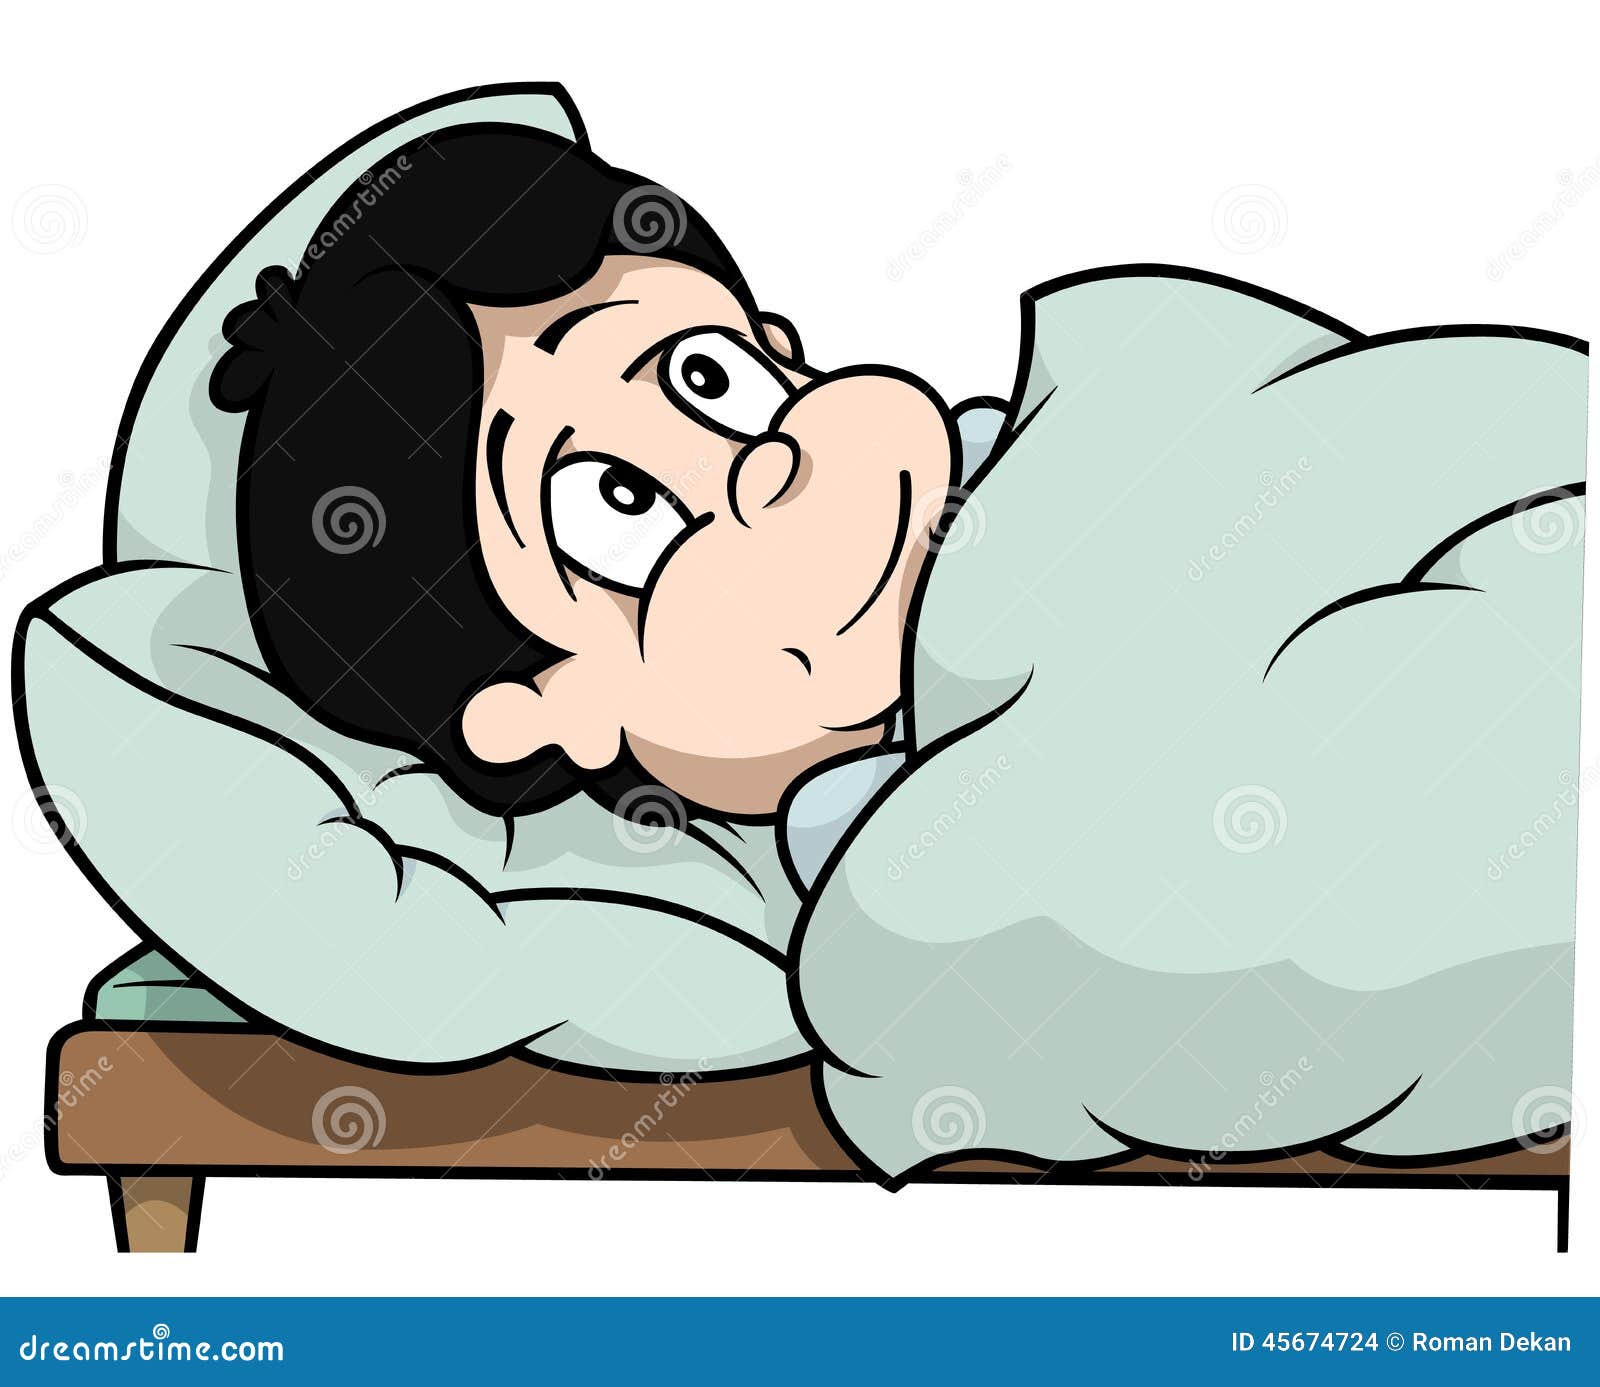 Boy Laying In Bed - Cartoon Illustration, Vector.